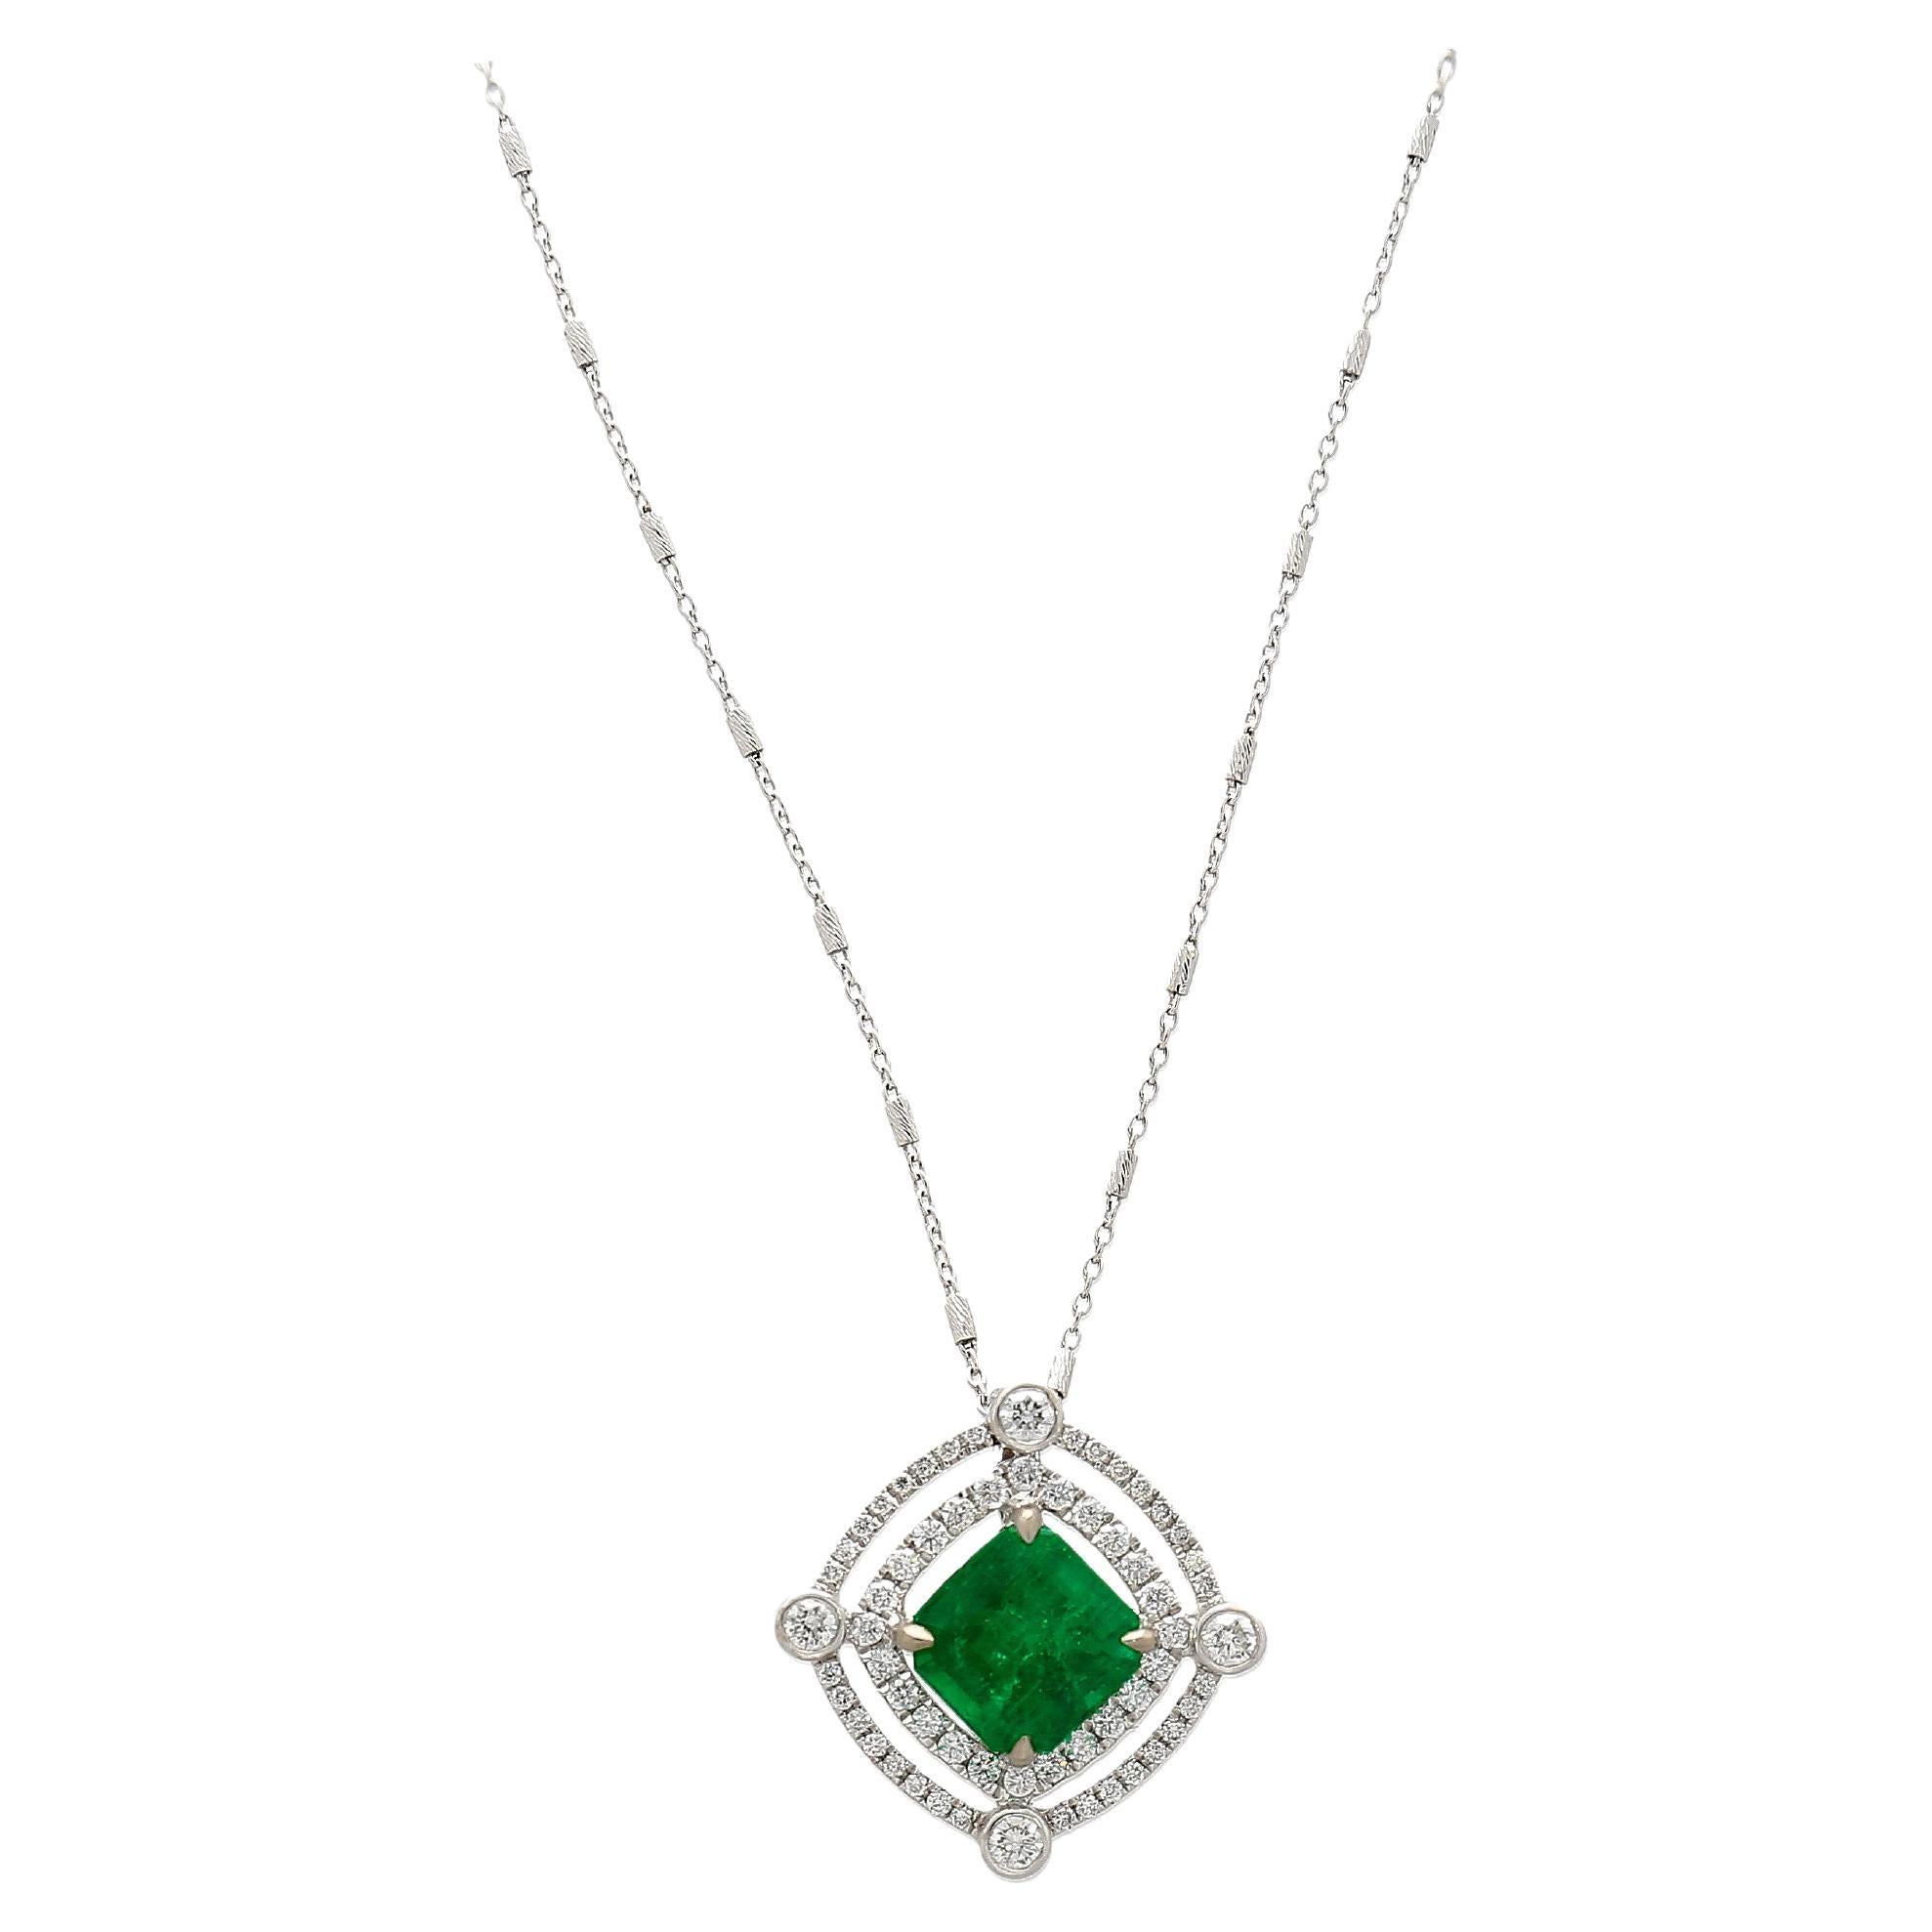 2.72CT GRS Certified Minor Oil Muzo Green Colombian Emerald Pendant Necklace